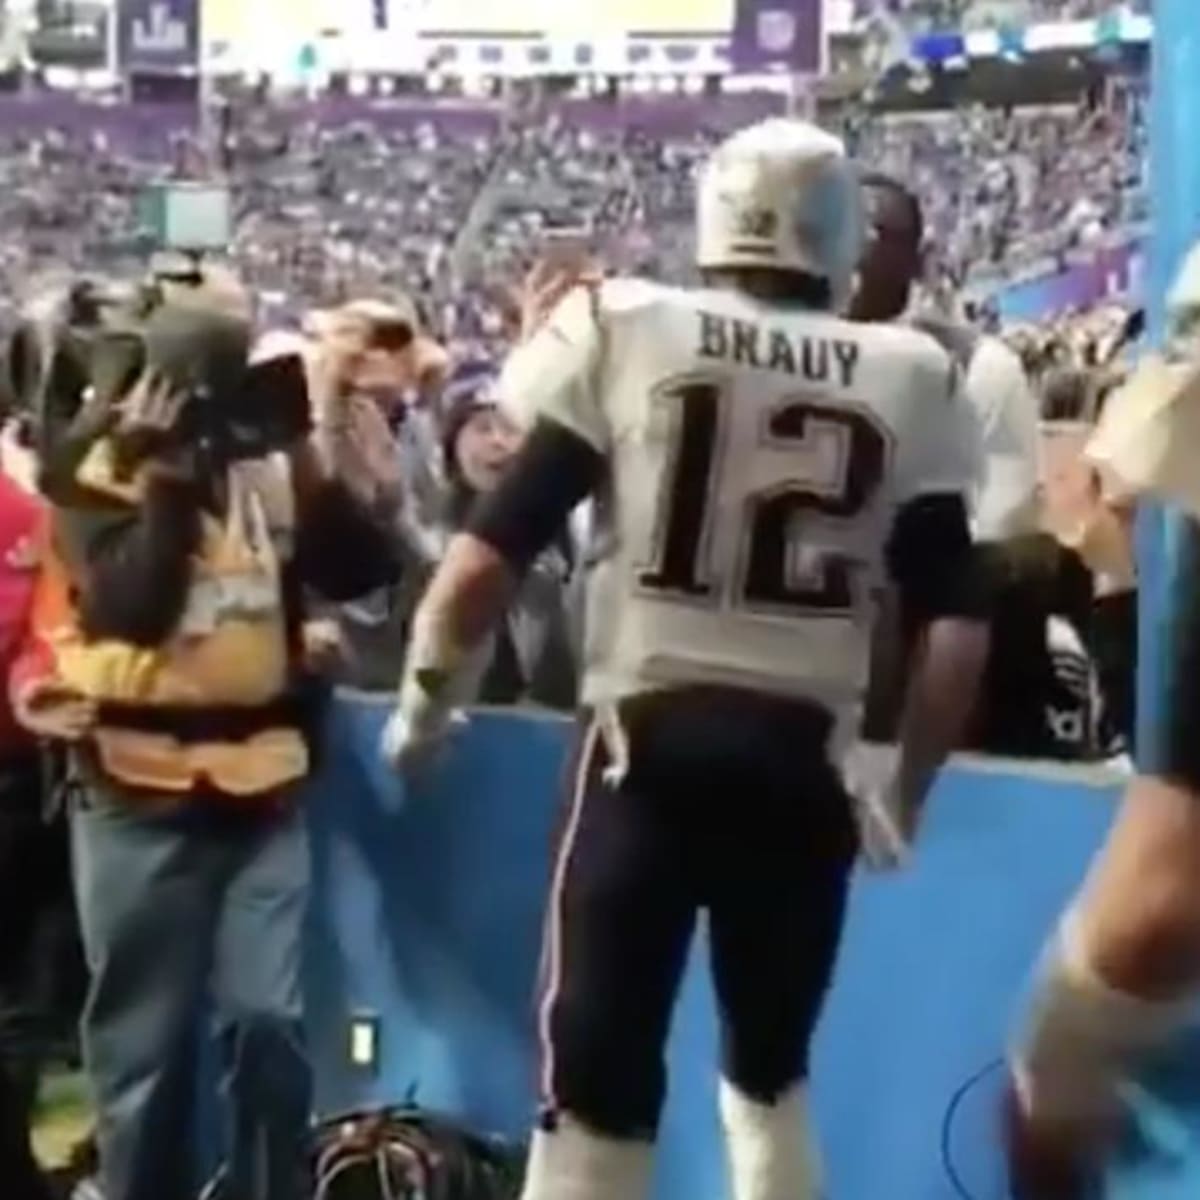 Tom Brady's pregame pass to Randy Moss was just like old times